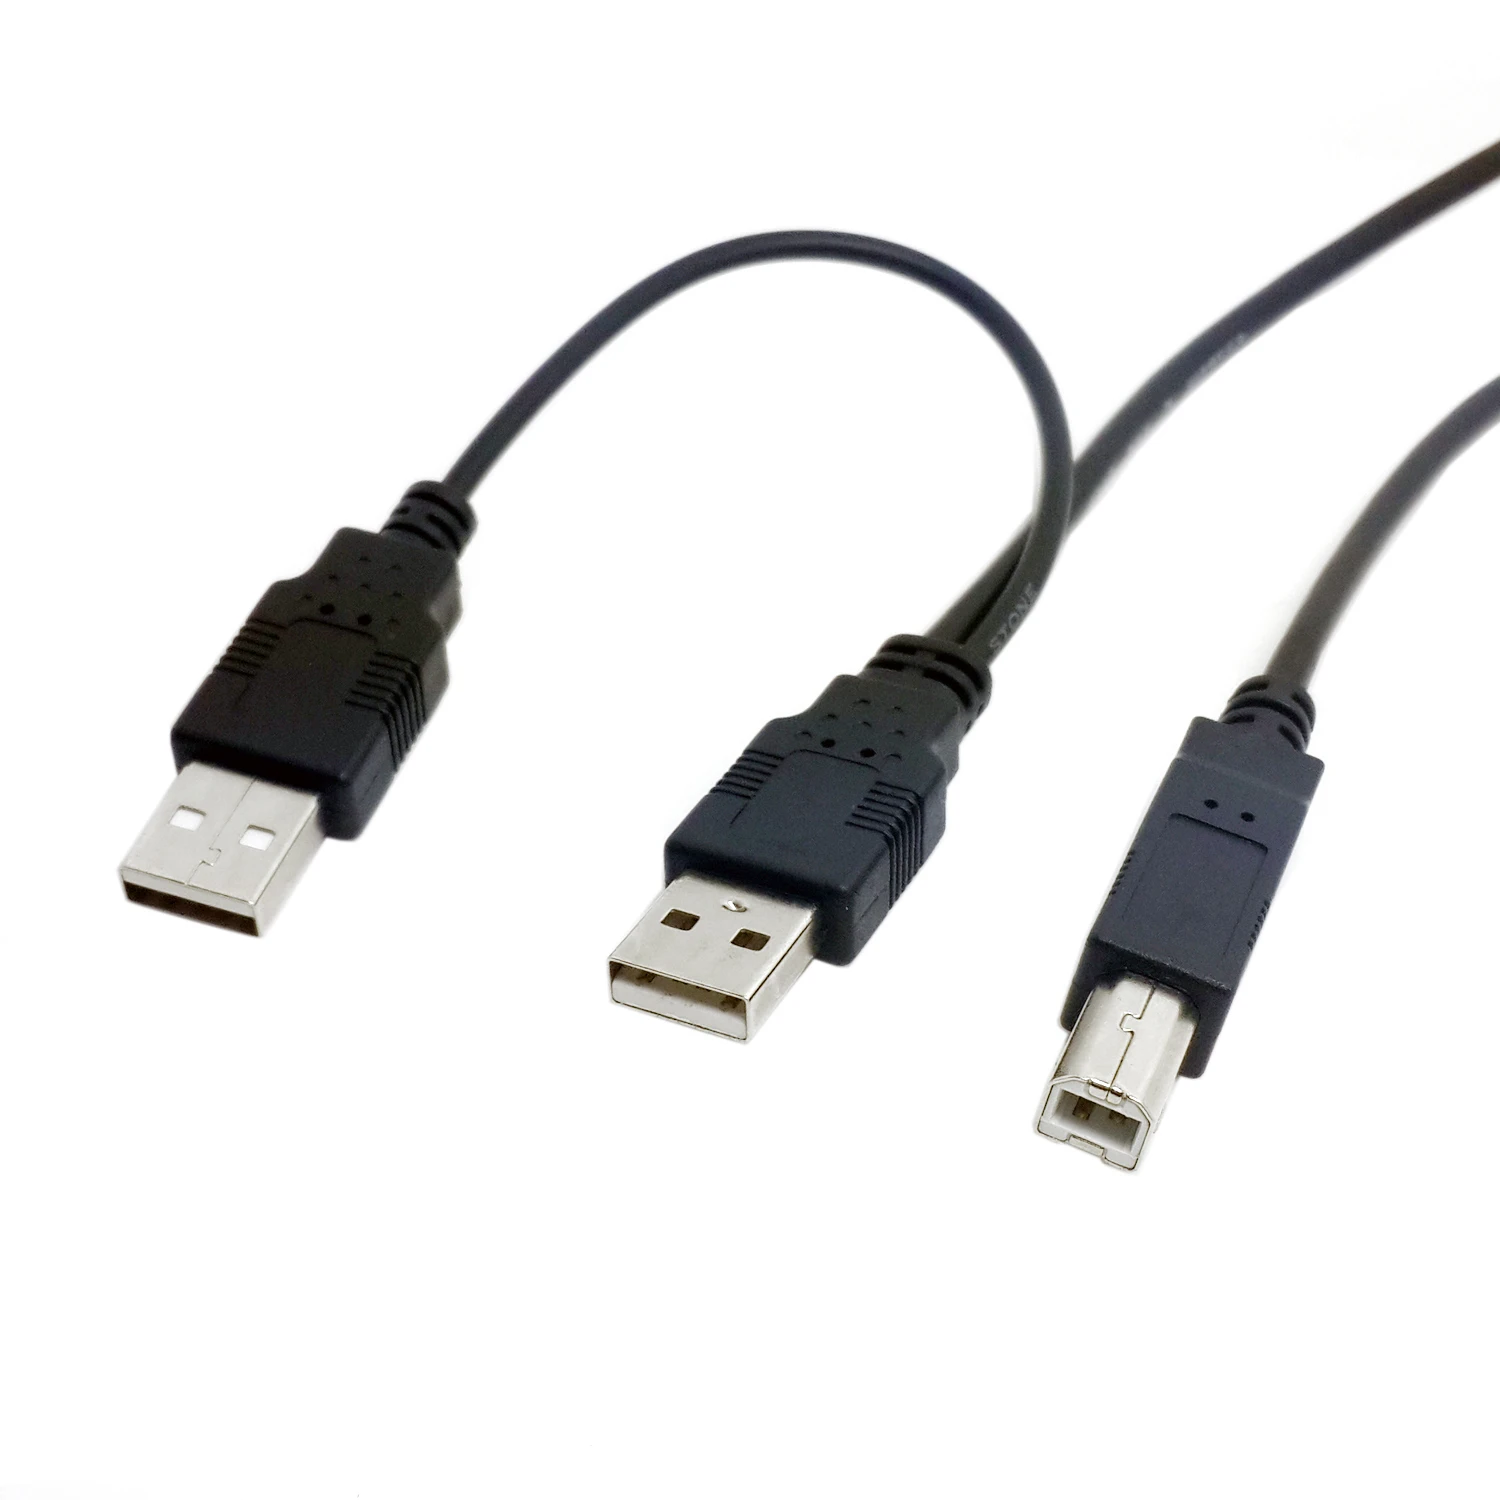 

Jimier CY Cable Dual USB 2.0 Male to Standard B Male Y Cable 80cm for Printer & Scanner & External Hard Disk Drive